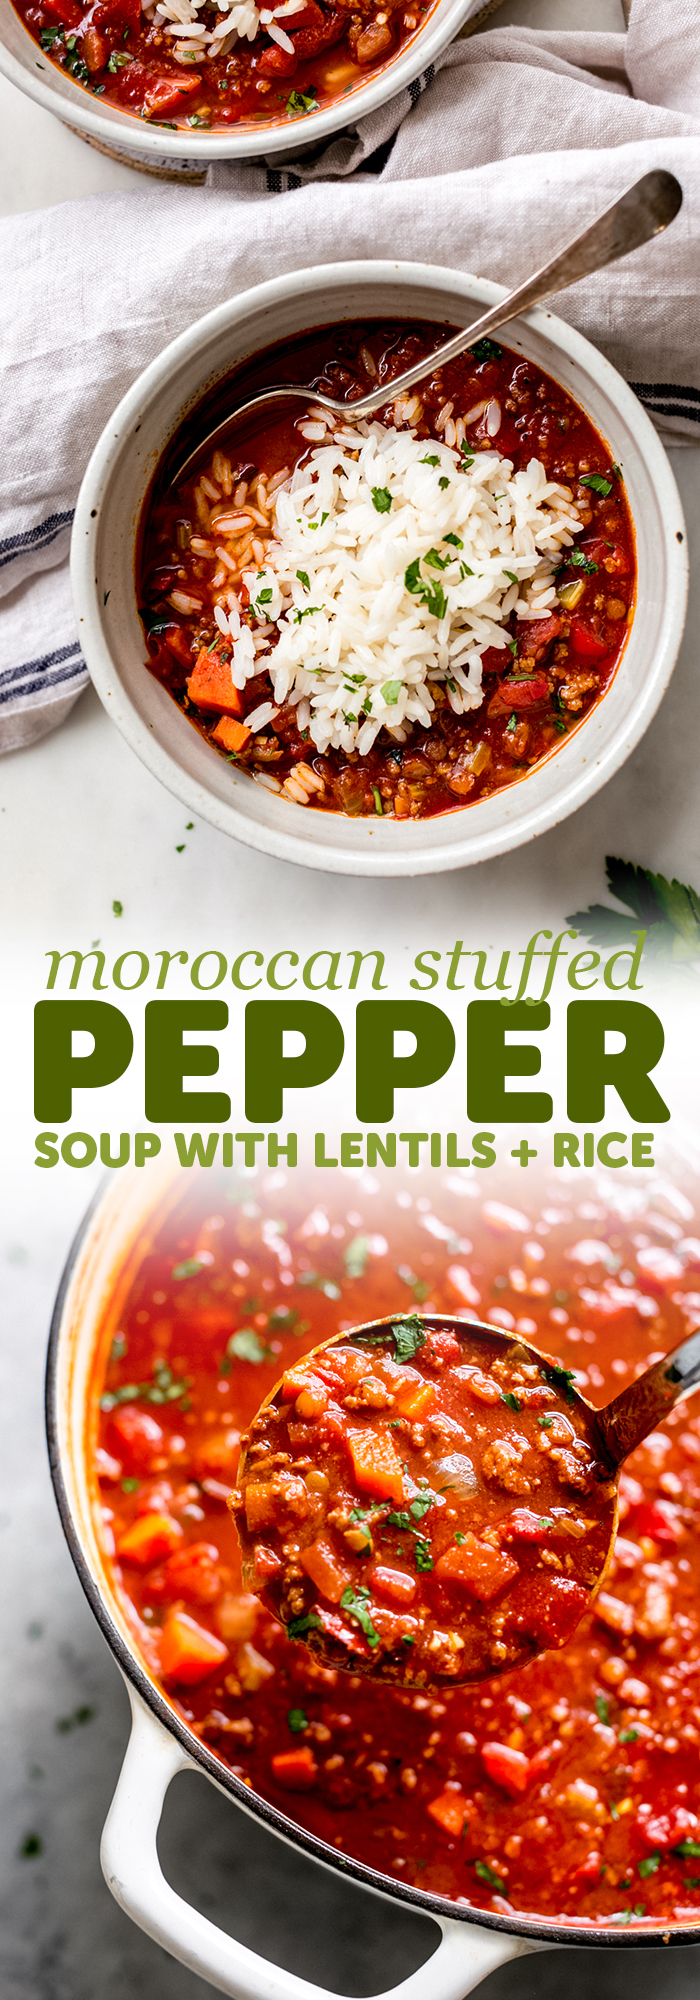 Moroccan Stuffed Pepper Soup - a new twist on the classic soup. This soup is spiced with moroccan spices to give it a warm and cozy feel! Great on a chilly evening! #stuffedpeppersoup #stuffedpeppers #moroccan #soup #stew | Little Spice Jar